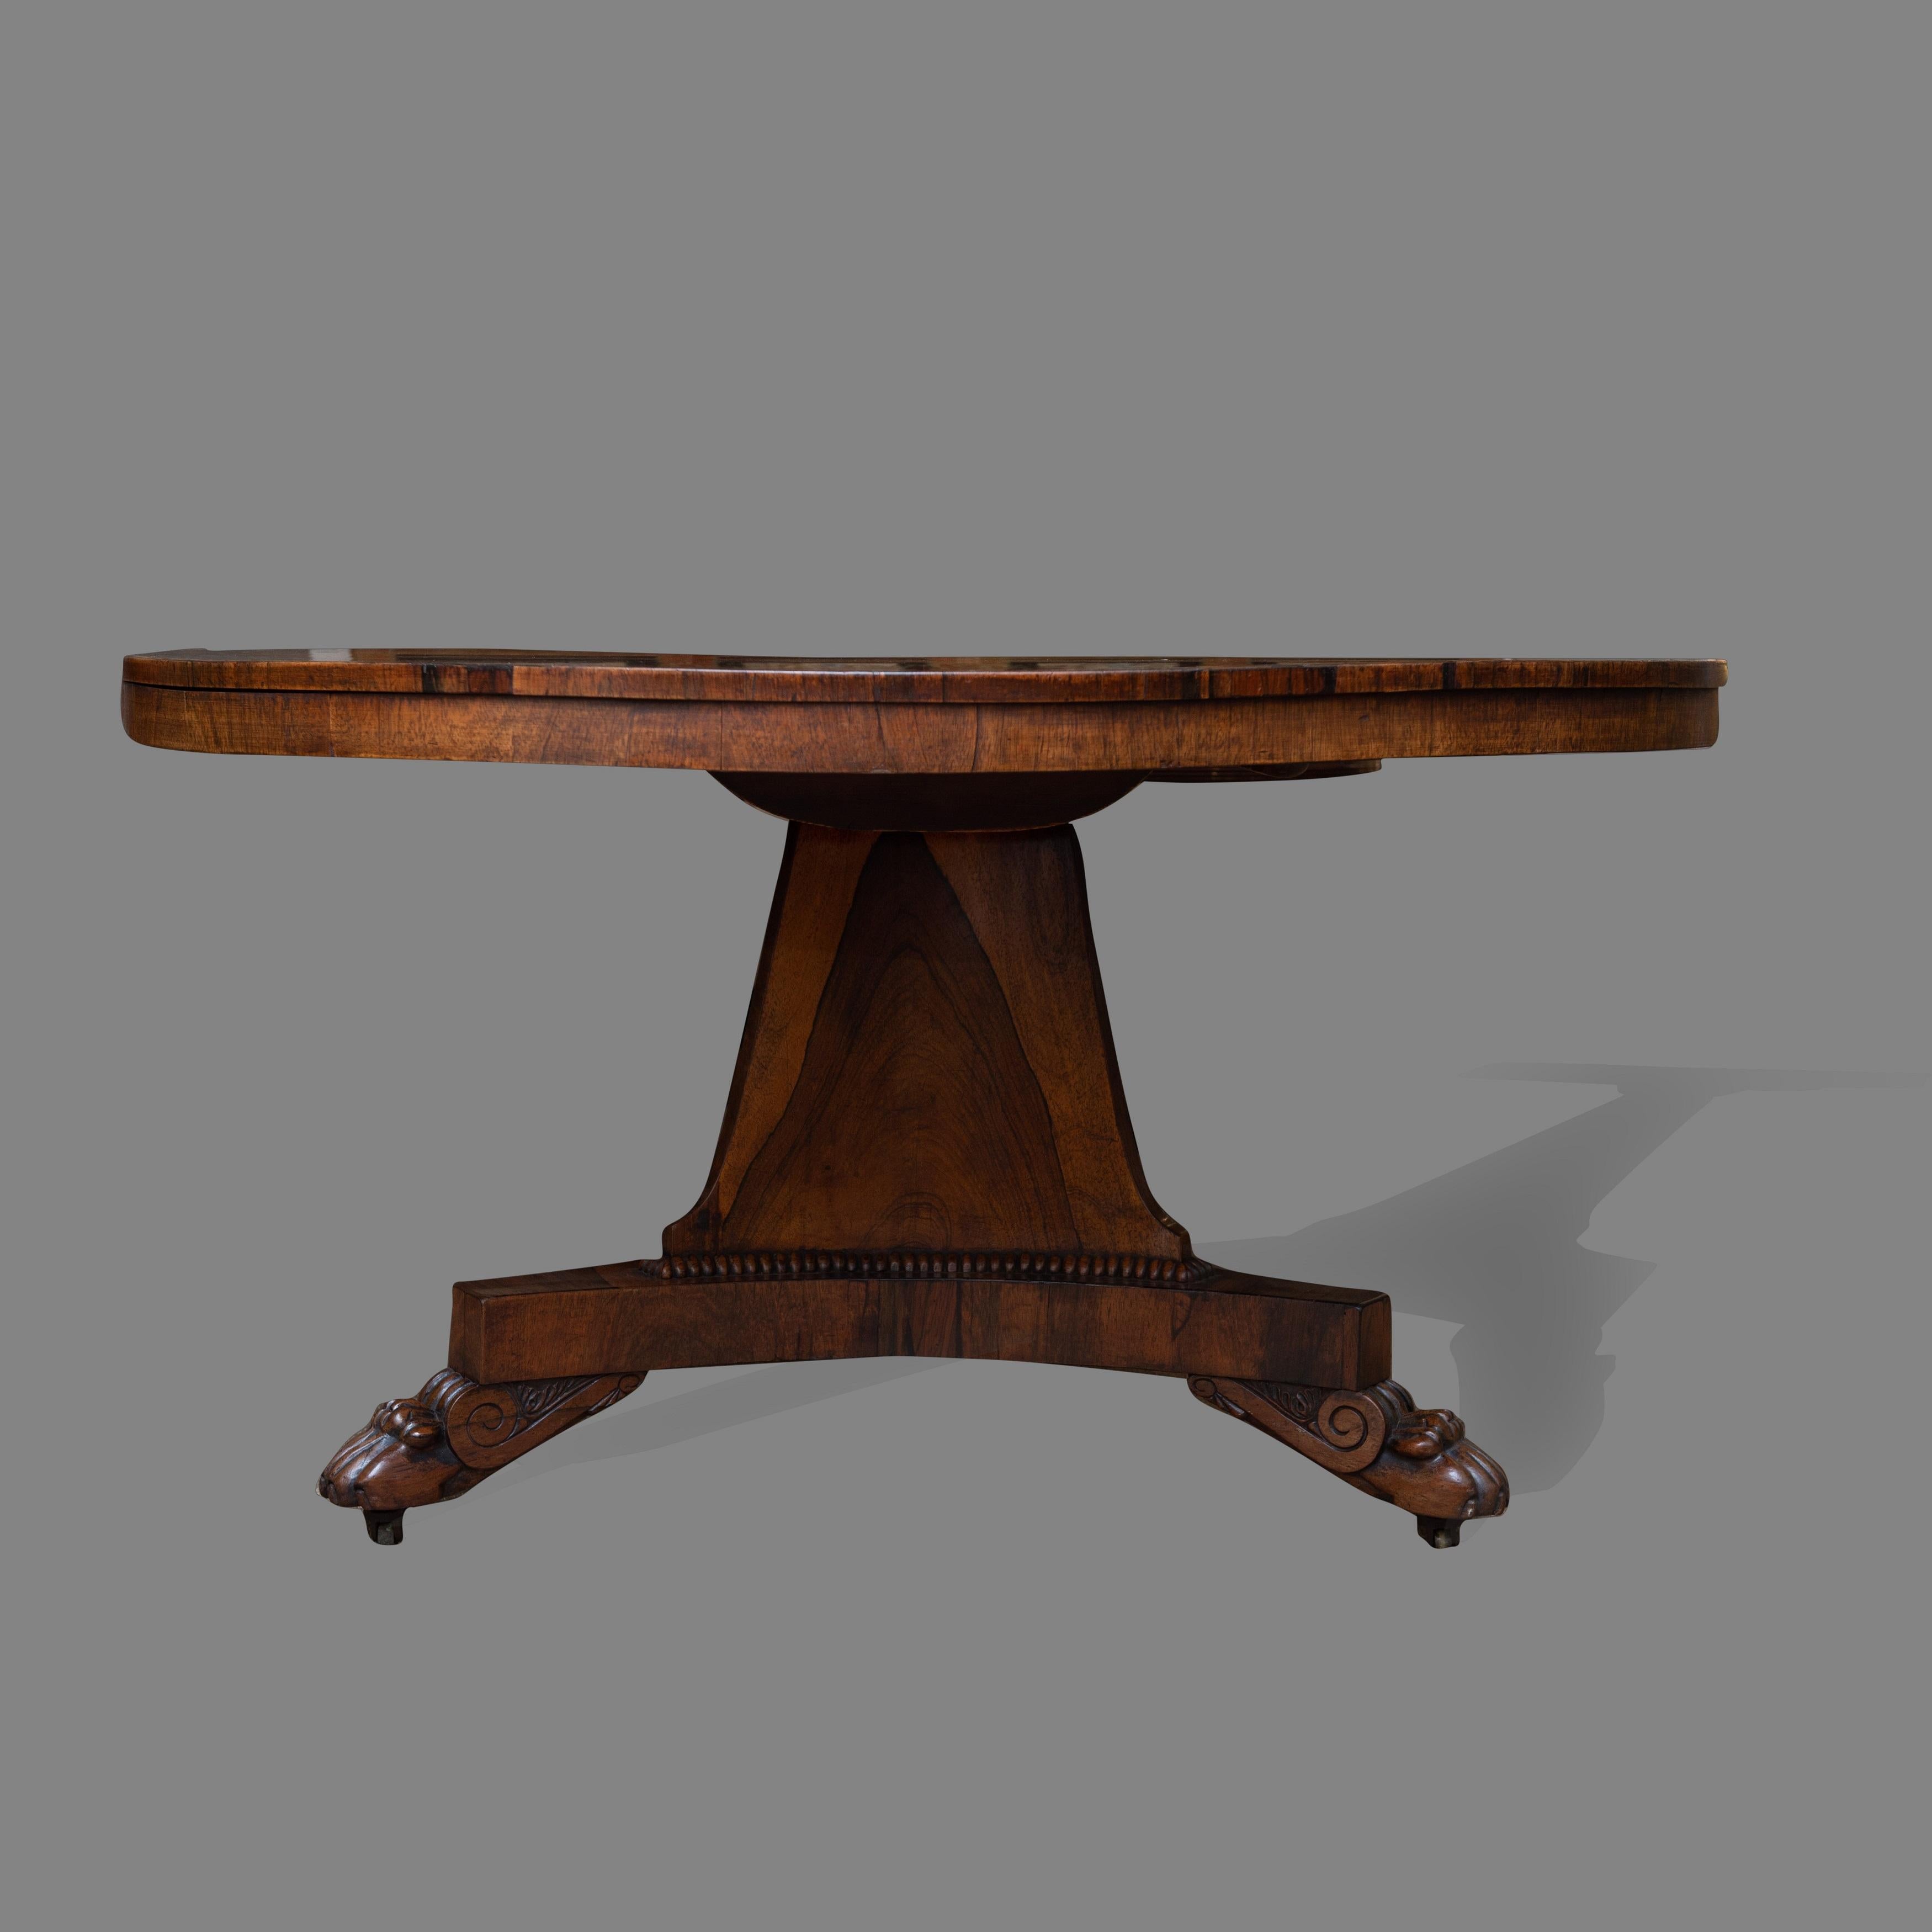 Of excellent color and condition. The well figured rosewood top with wide brass inlaid border of stylized foliate decoration. The central triform column support with rich molding adjoining a conforming triform terminating in well carved claw feet on